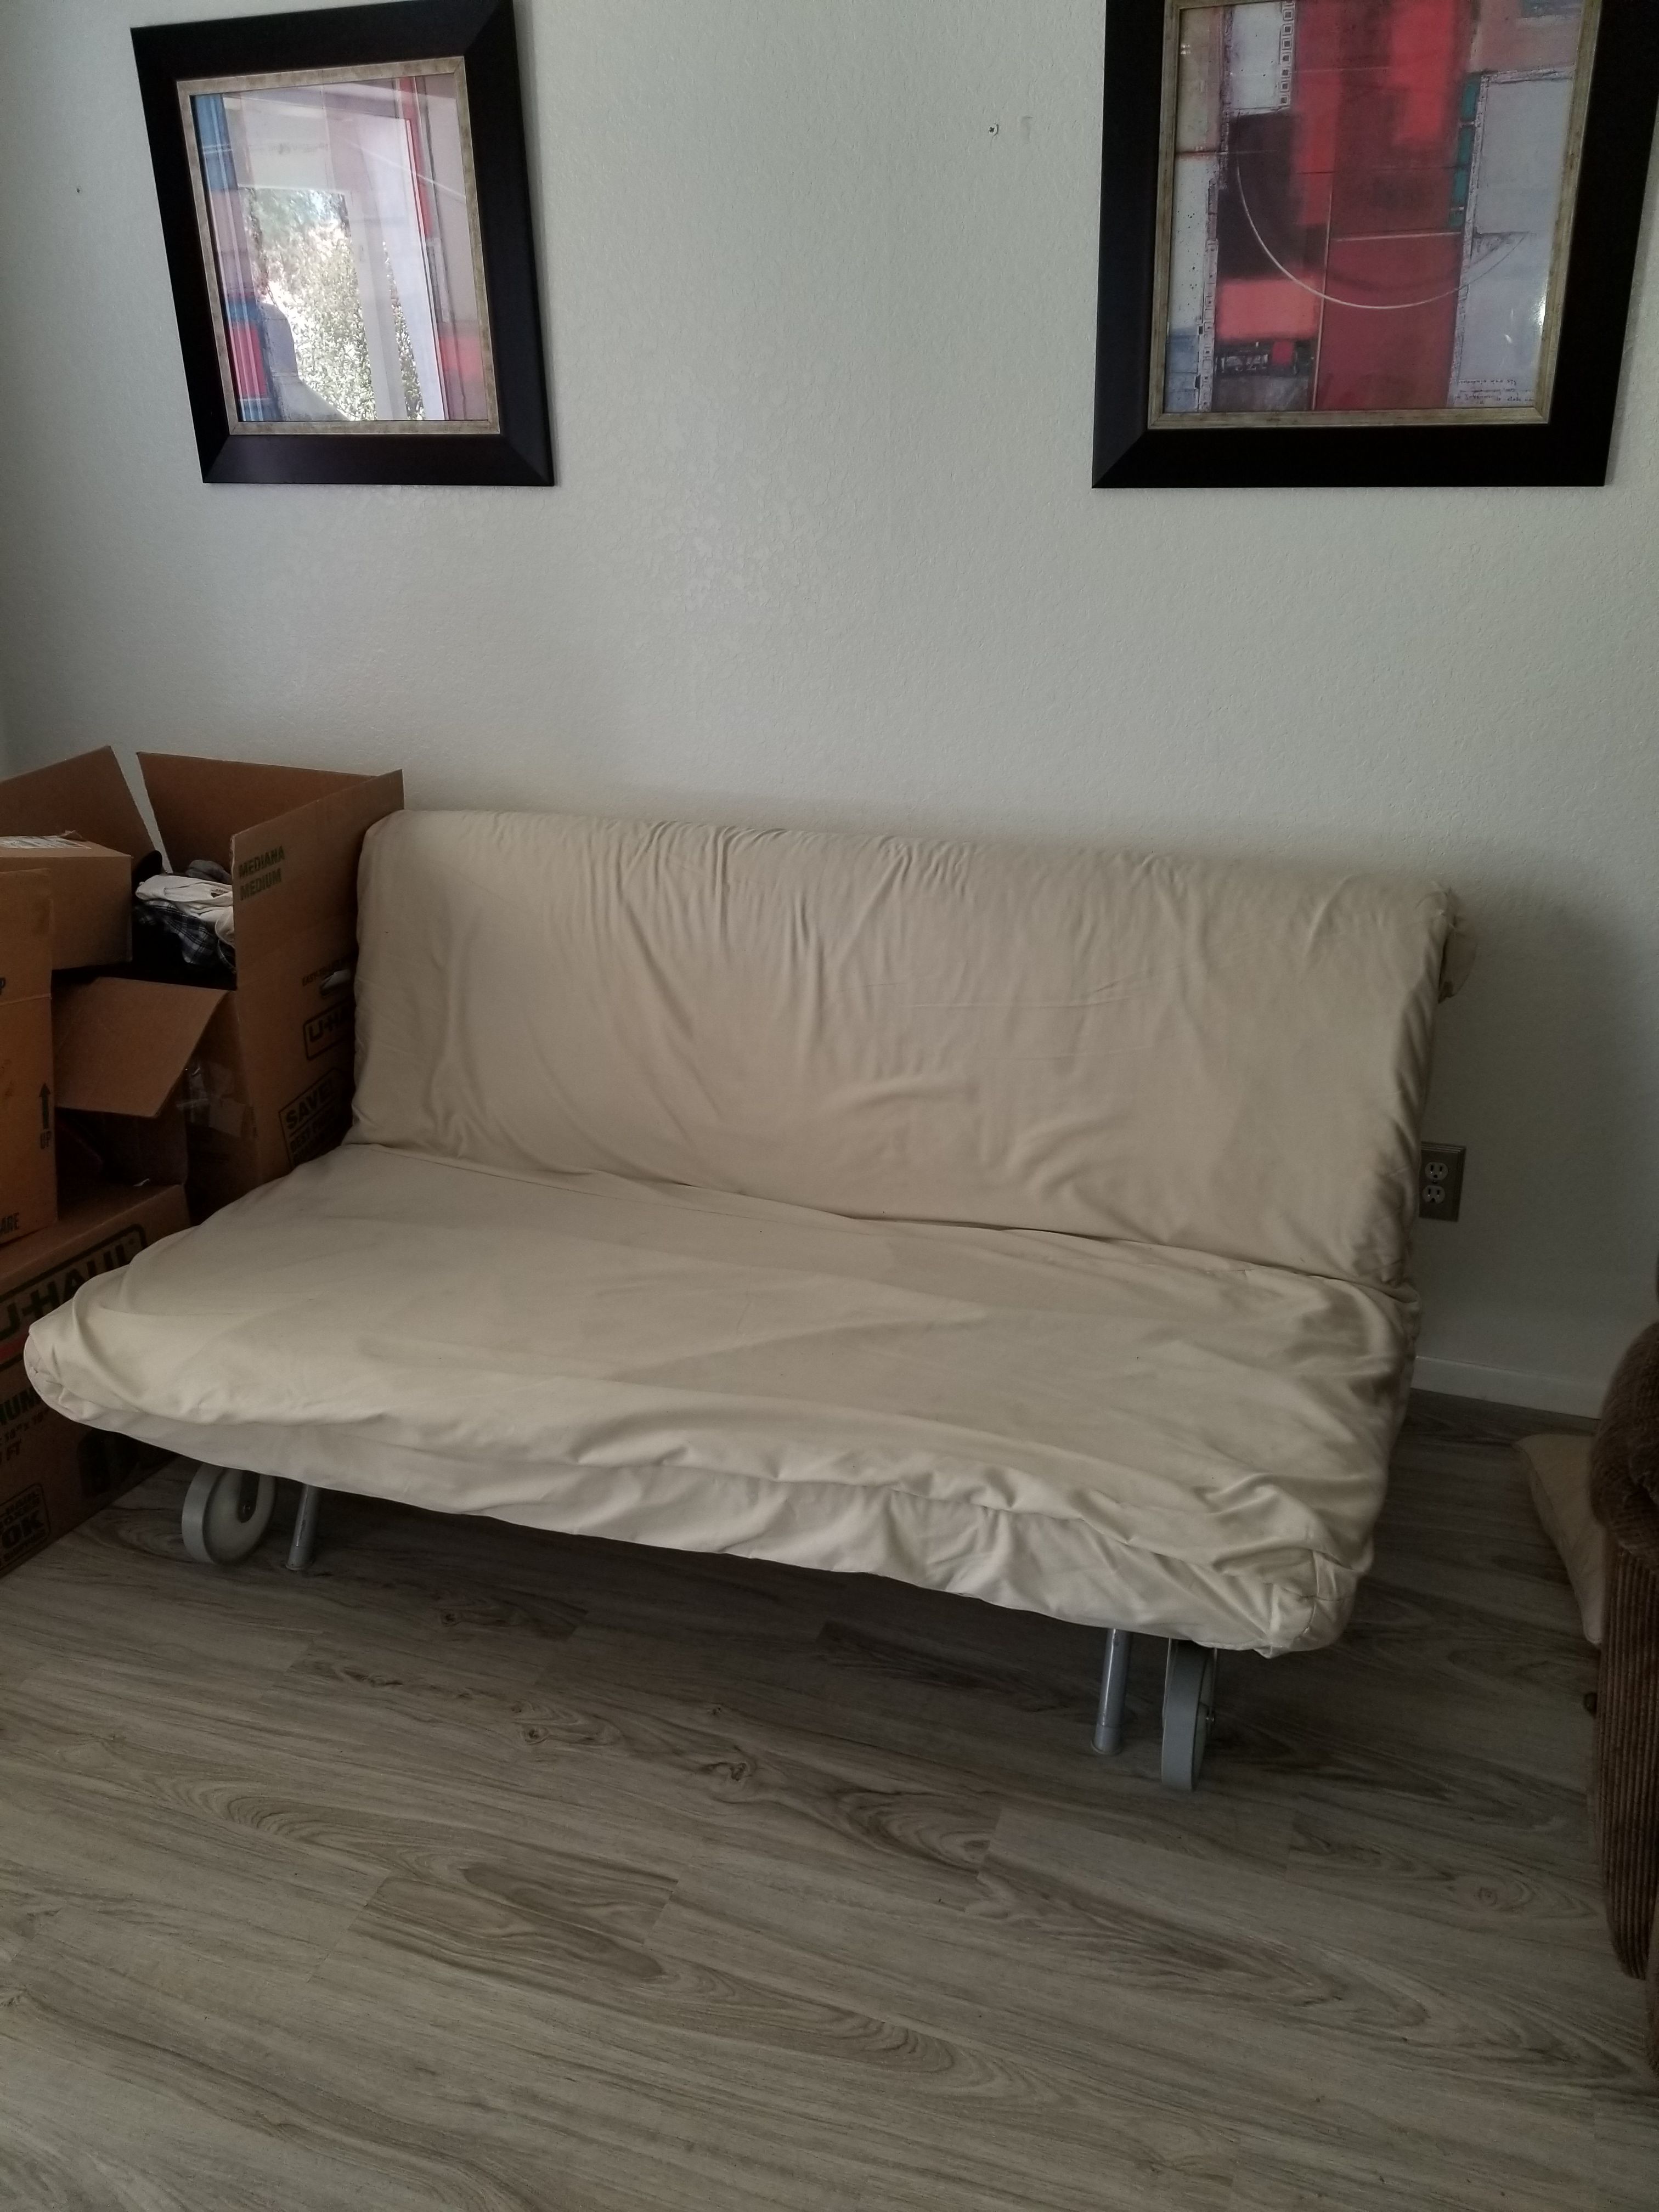 Ikea PS morbo futon convertible couch Sale in Tucson, AZ - OfferUp